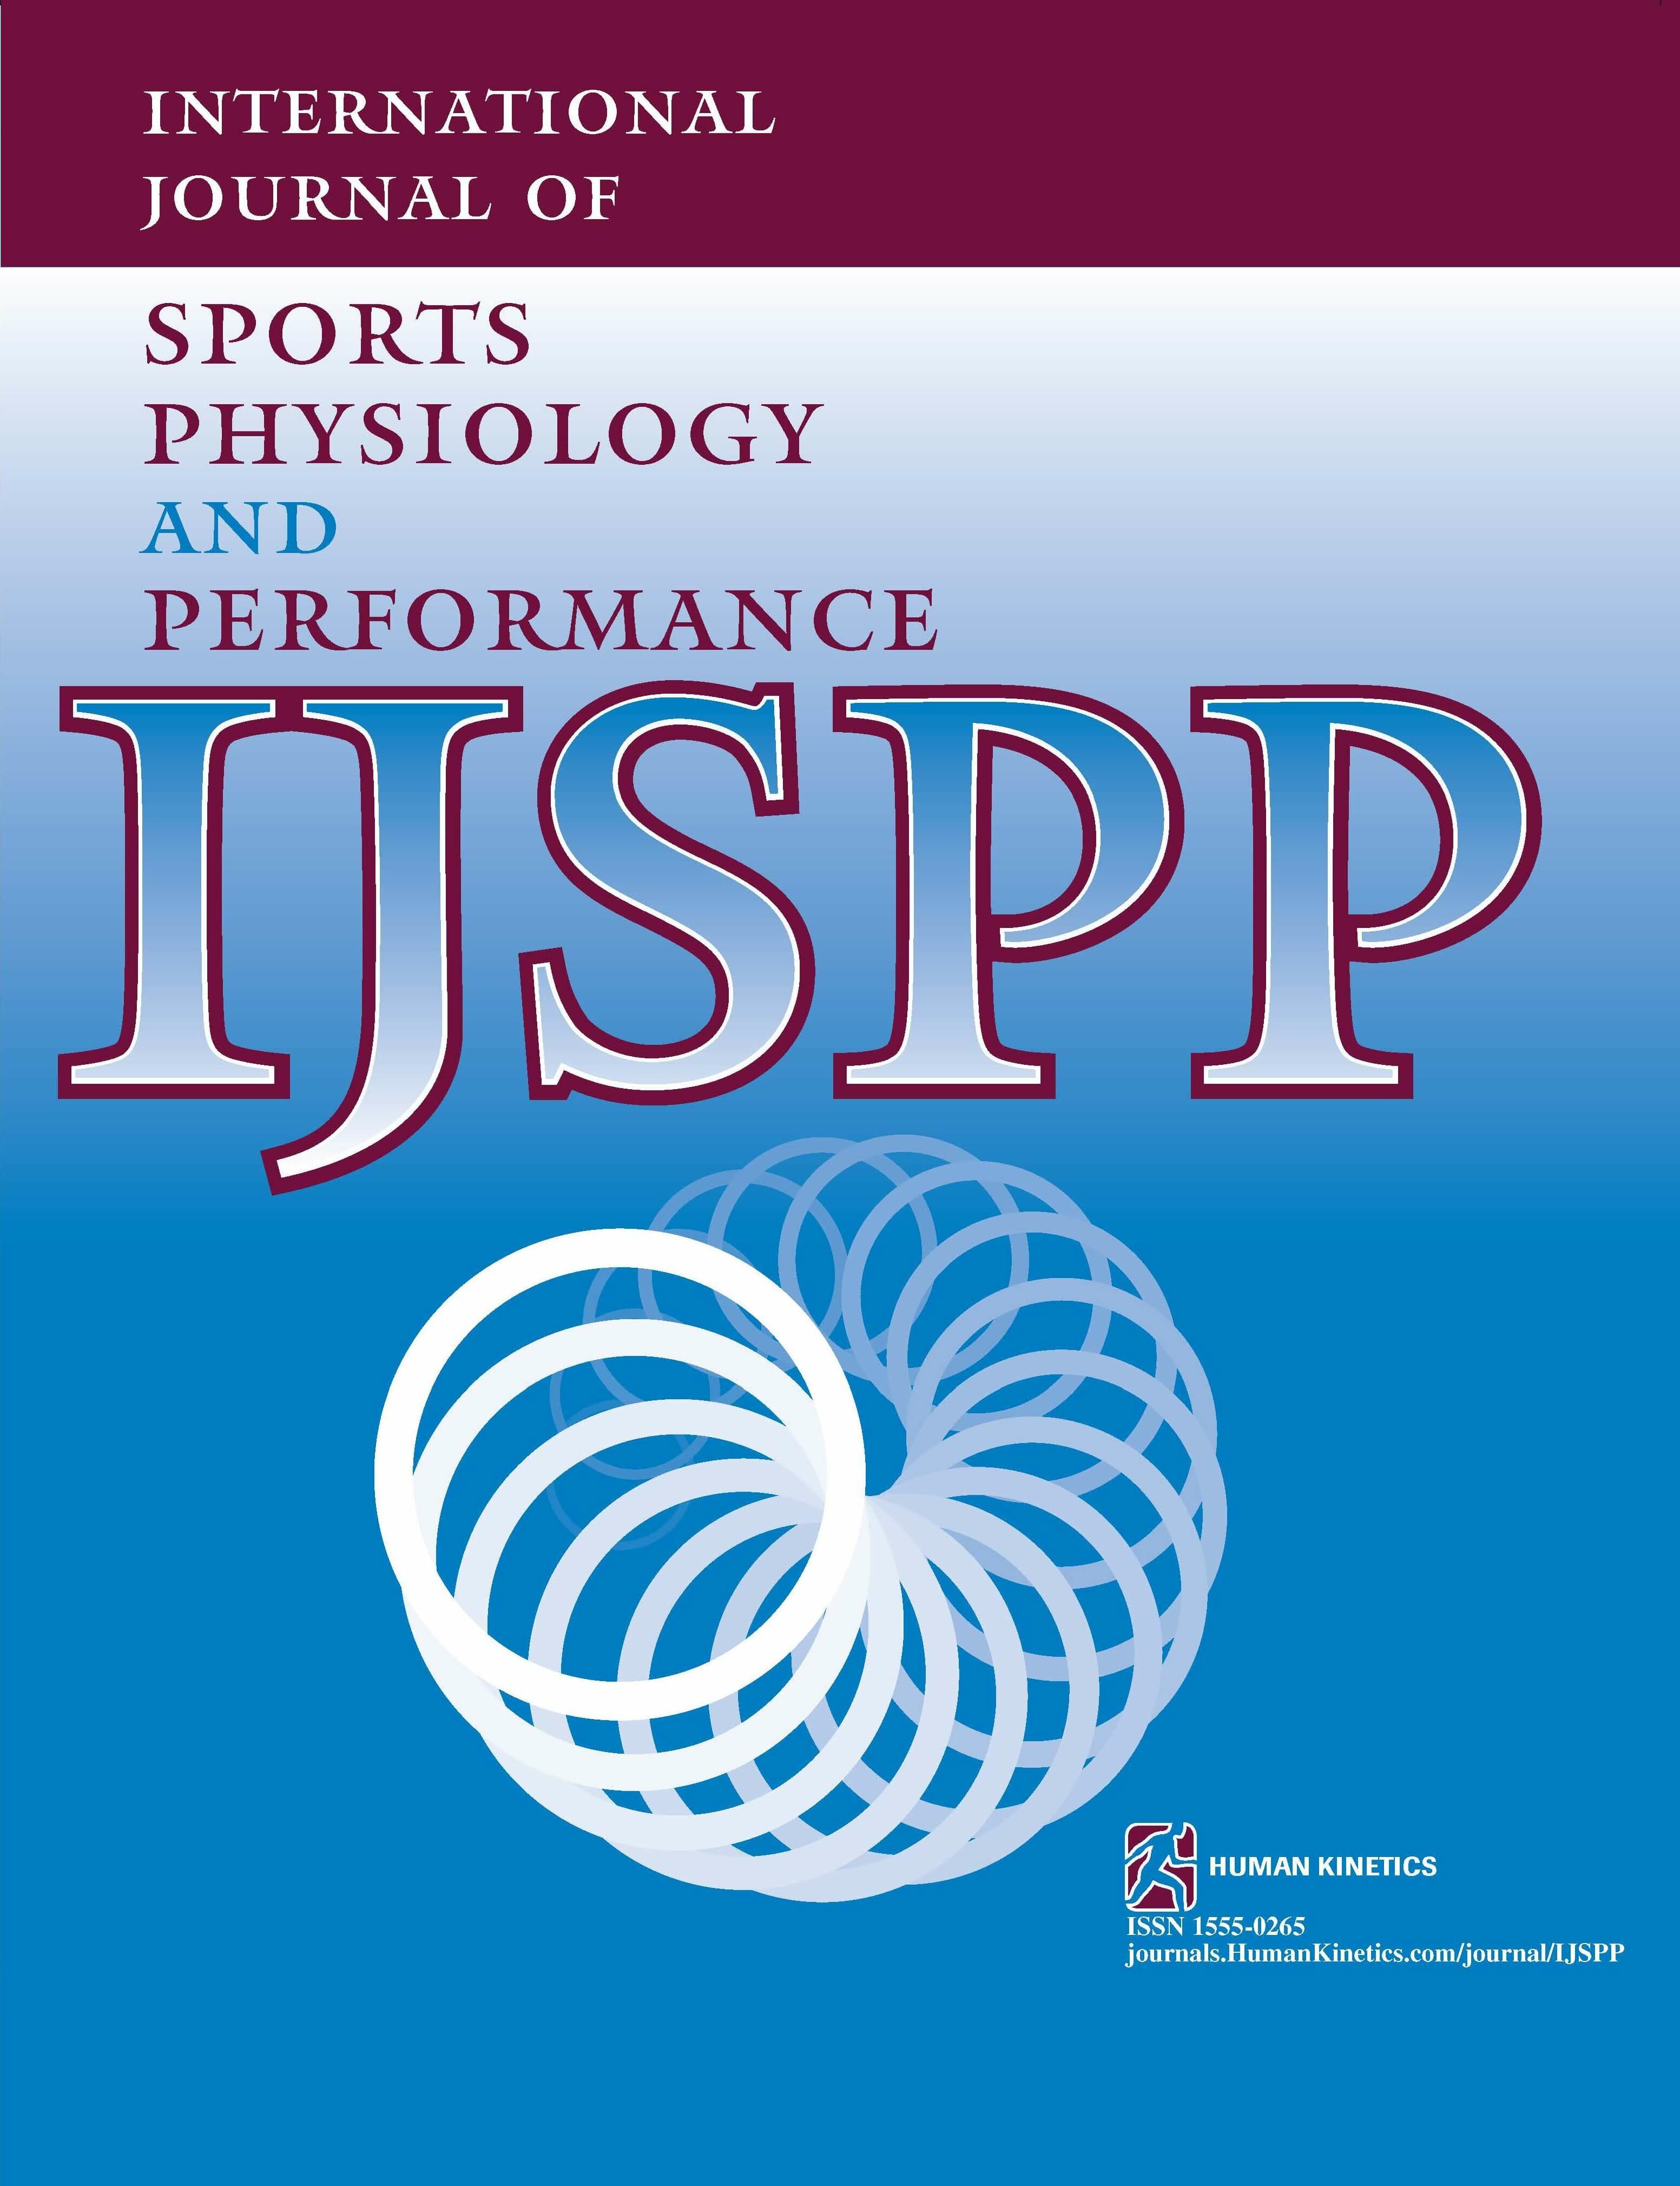 Match Running Performance in Australian Football Is Related to Muscle Fiber Typology